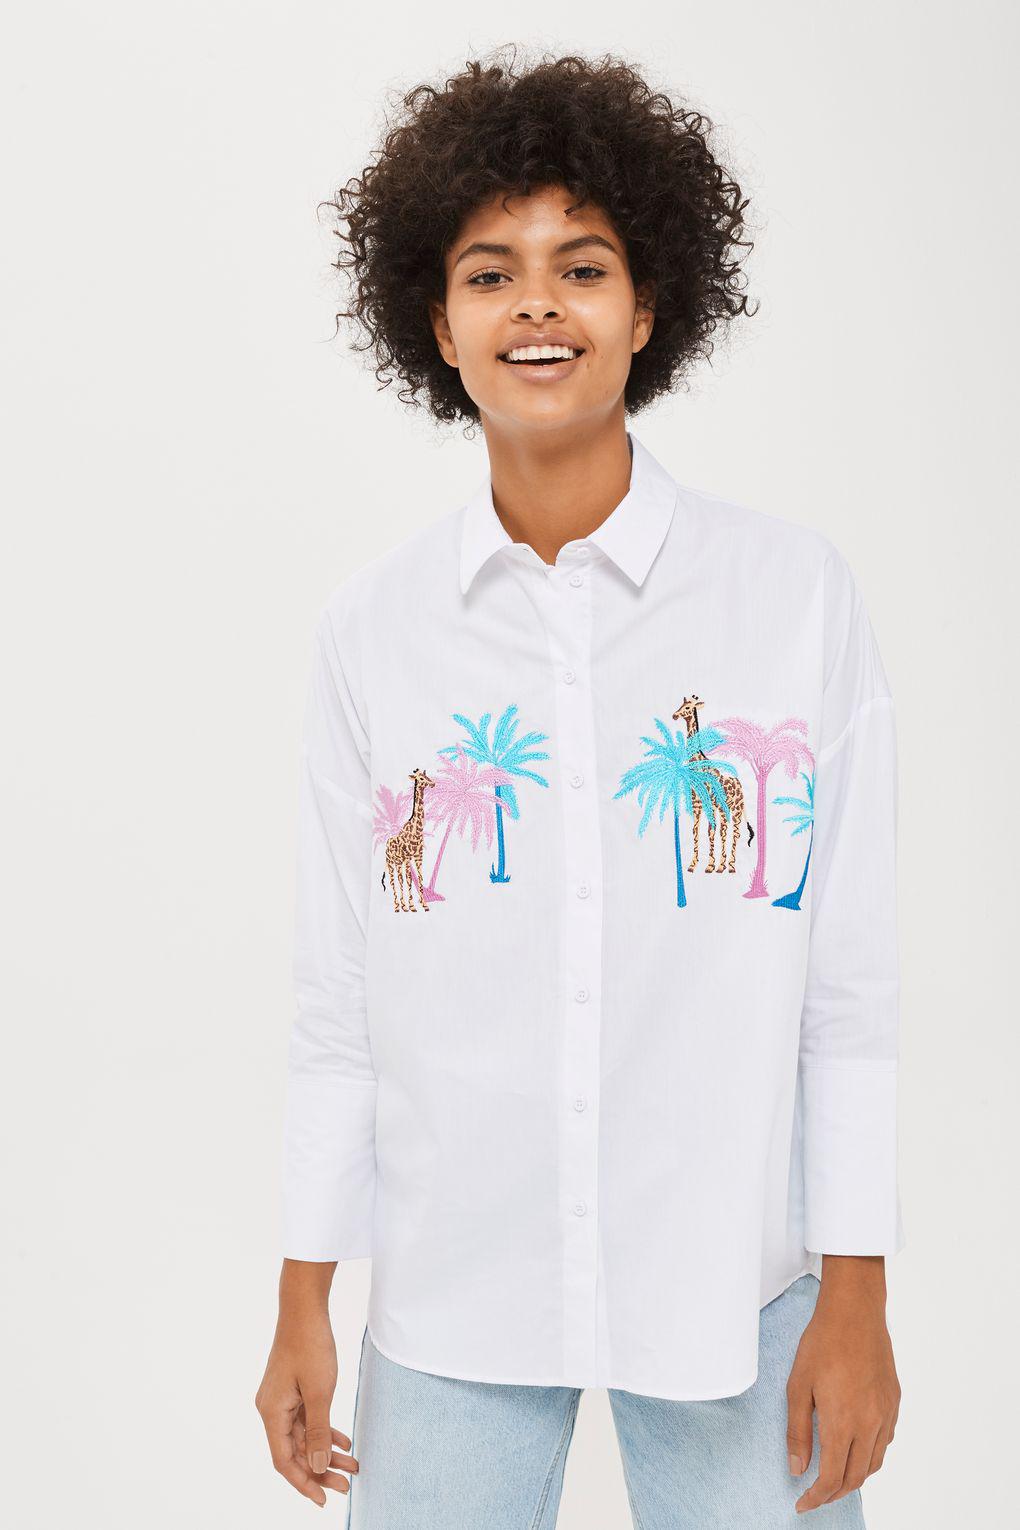 TOPSHOP Cotton Palm And Giraffe Print Shirt in White - Lyst